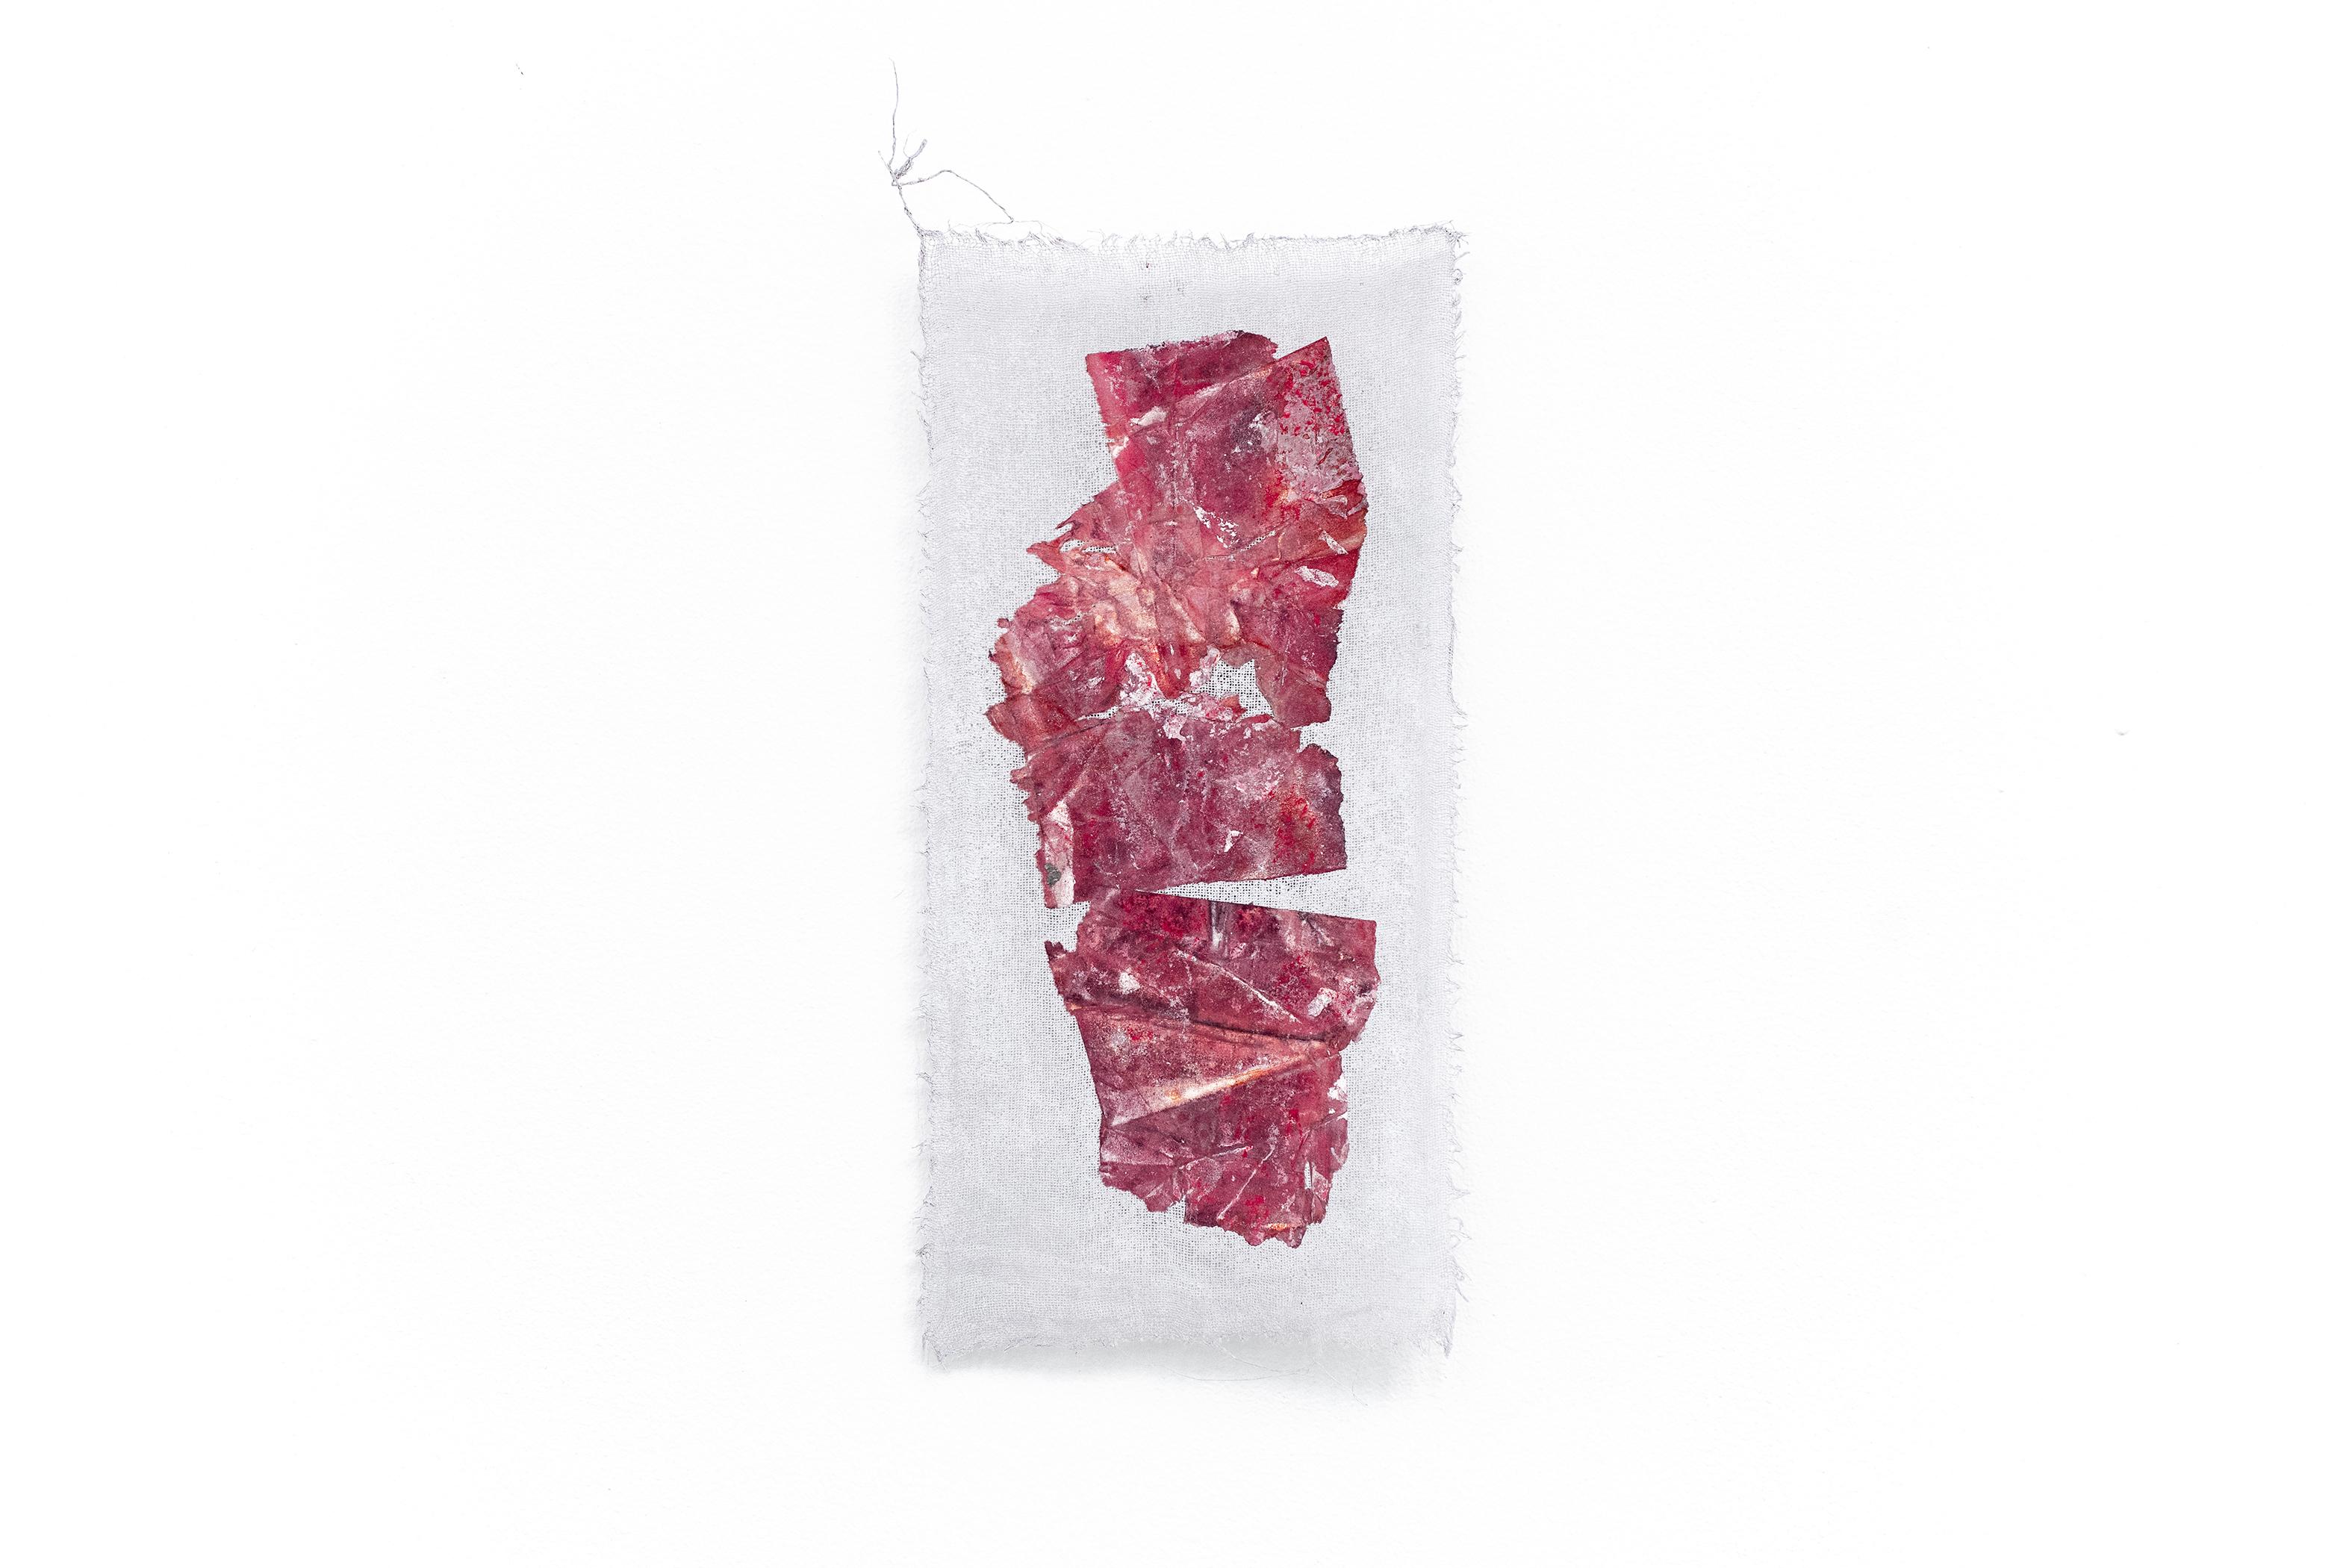 Flesh, Mulberry paper and acrylic on gauze - Painting by Xinyi Liu